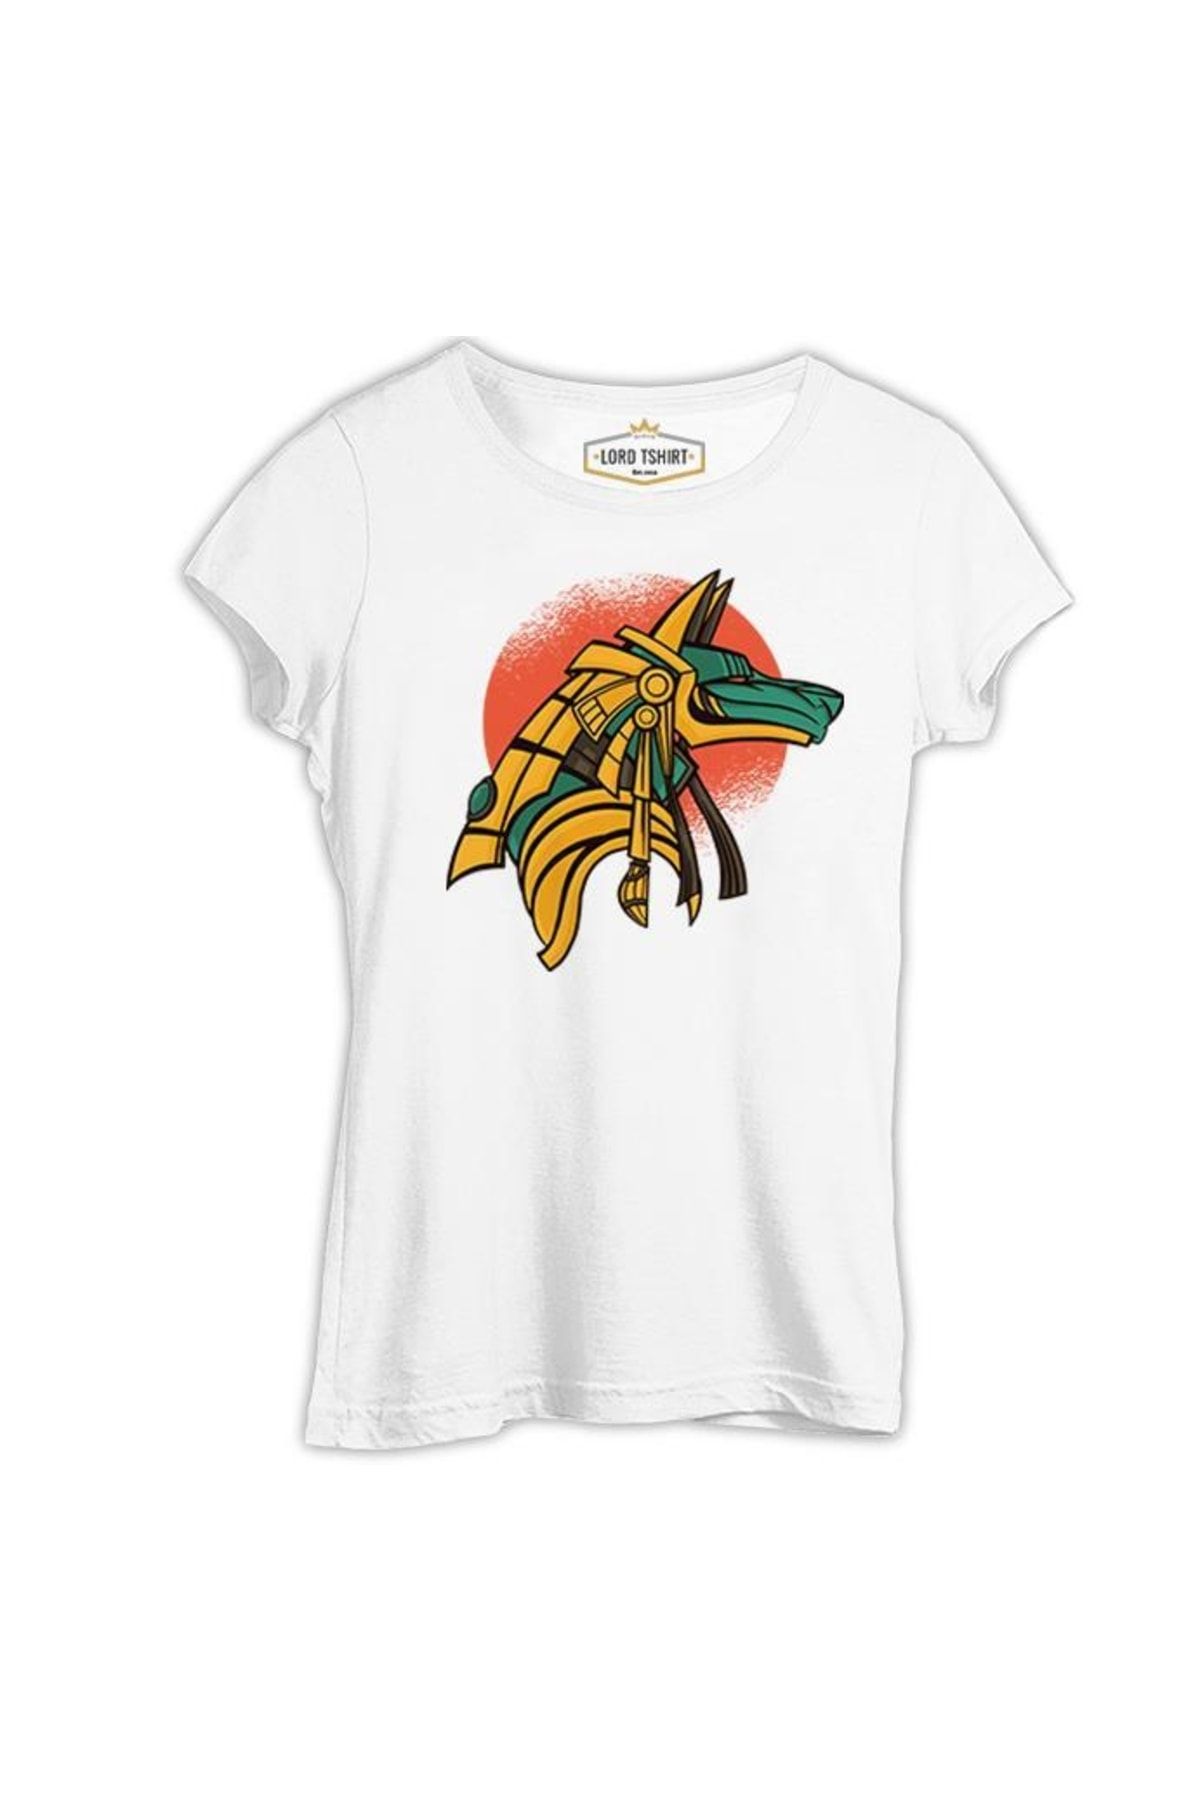 Lord T-Shirt Colorful Anubis In Ancient Egypt Beyaz Tshirt